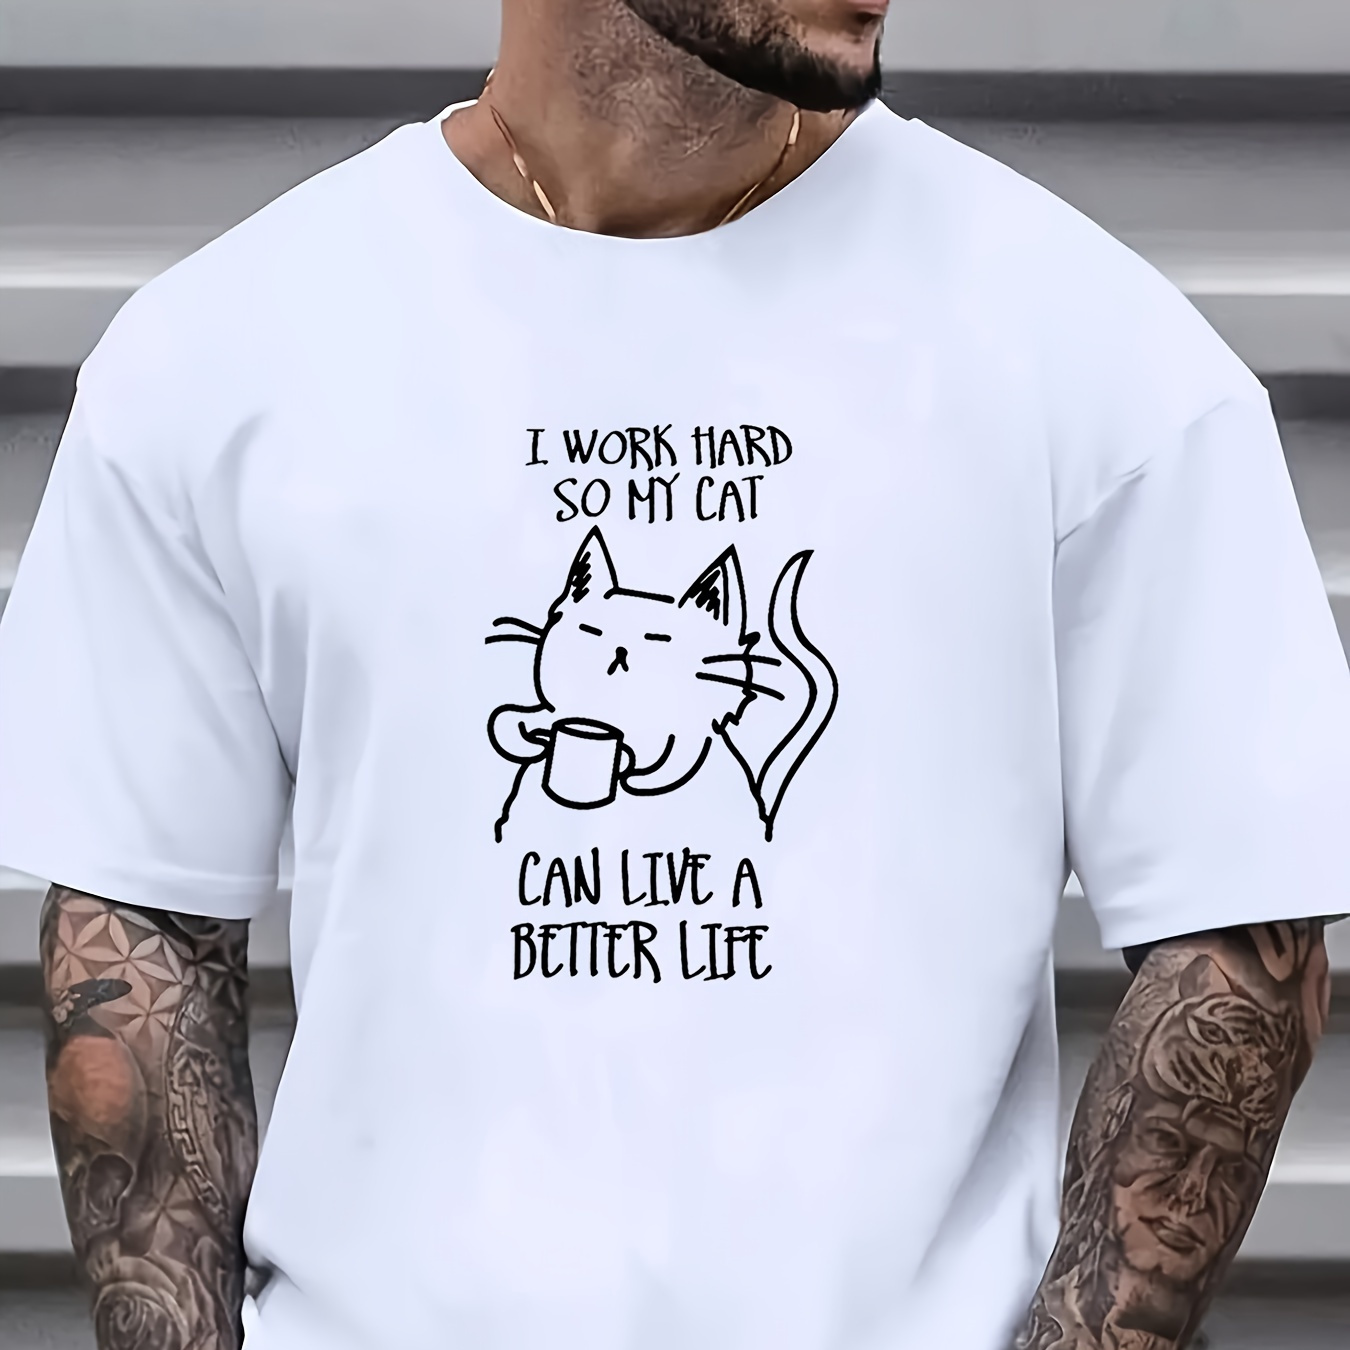 

Men's Casual Cotton Short Sleeve, Stylish T-shirt With "i Work Hard So My Cat Can Have A Better Life"creative Print, Summer Fashion Top, Crew Neck Tee-shirt For Male